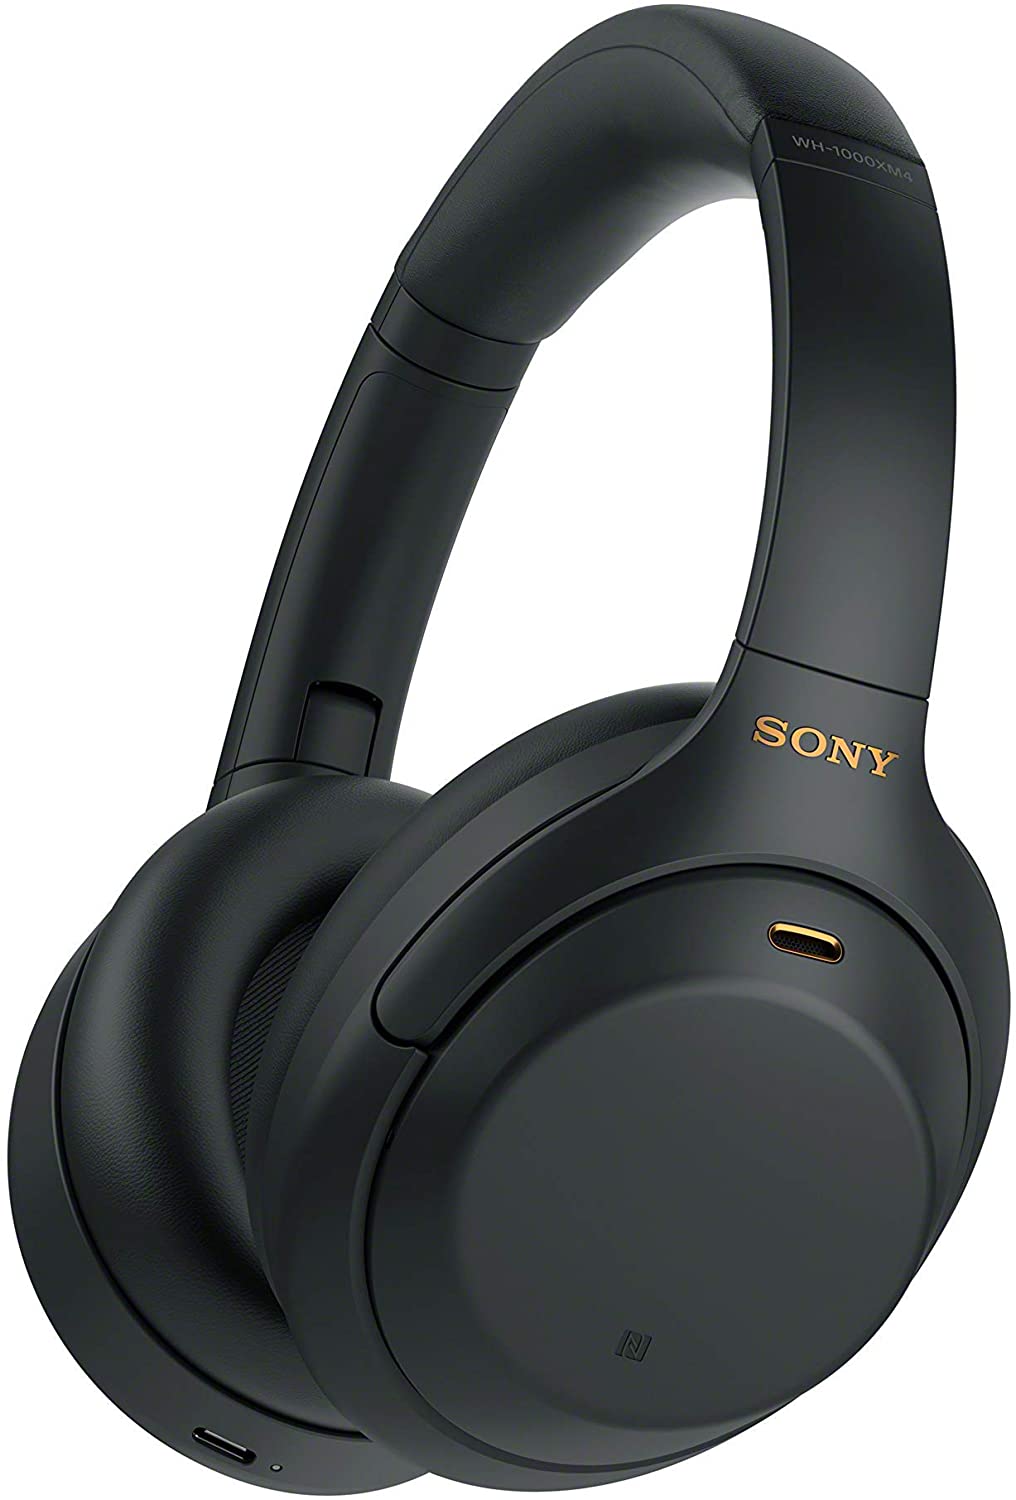 Sony WH-1000XM4 Wireless Noise-Cancelling Over-the-Ear Headphones - Black (Certified Refurbished)